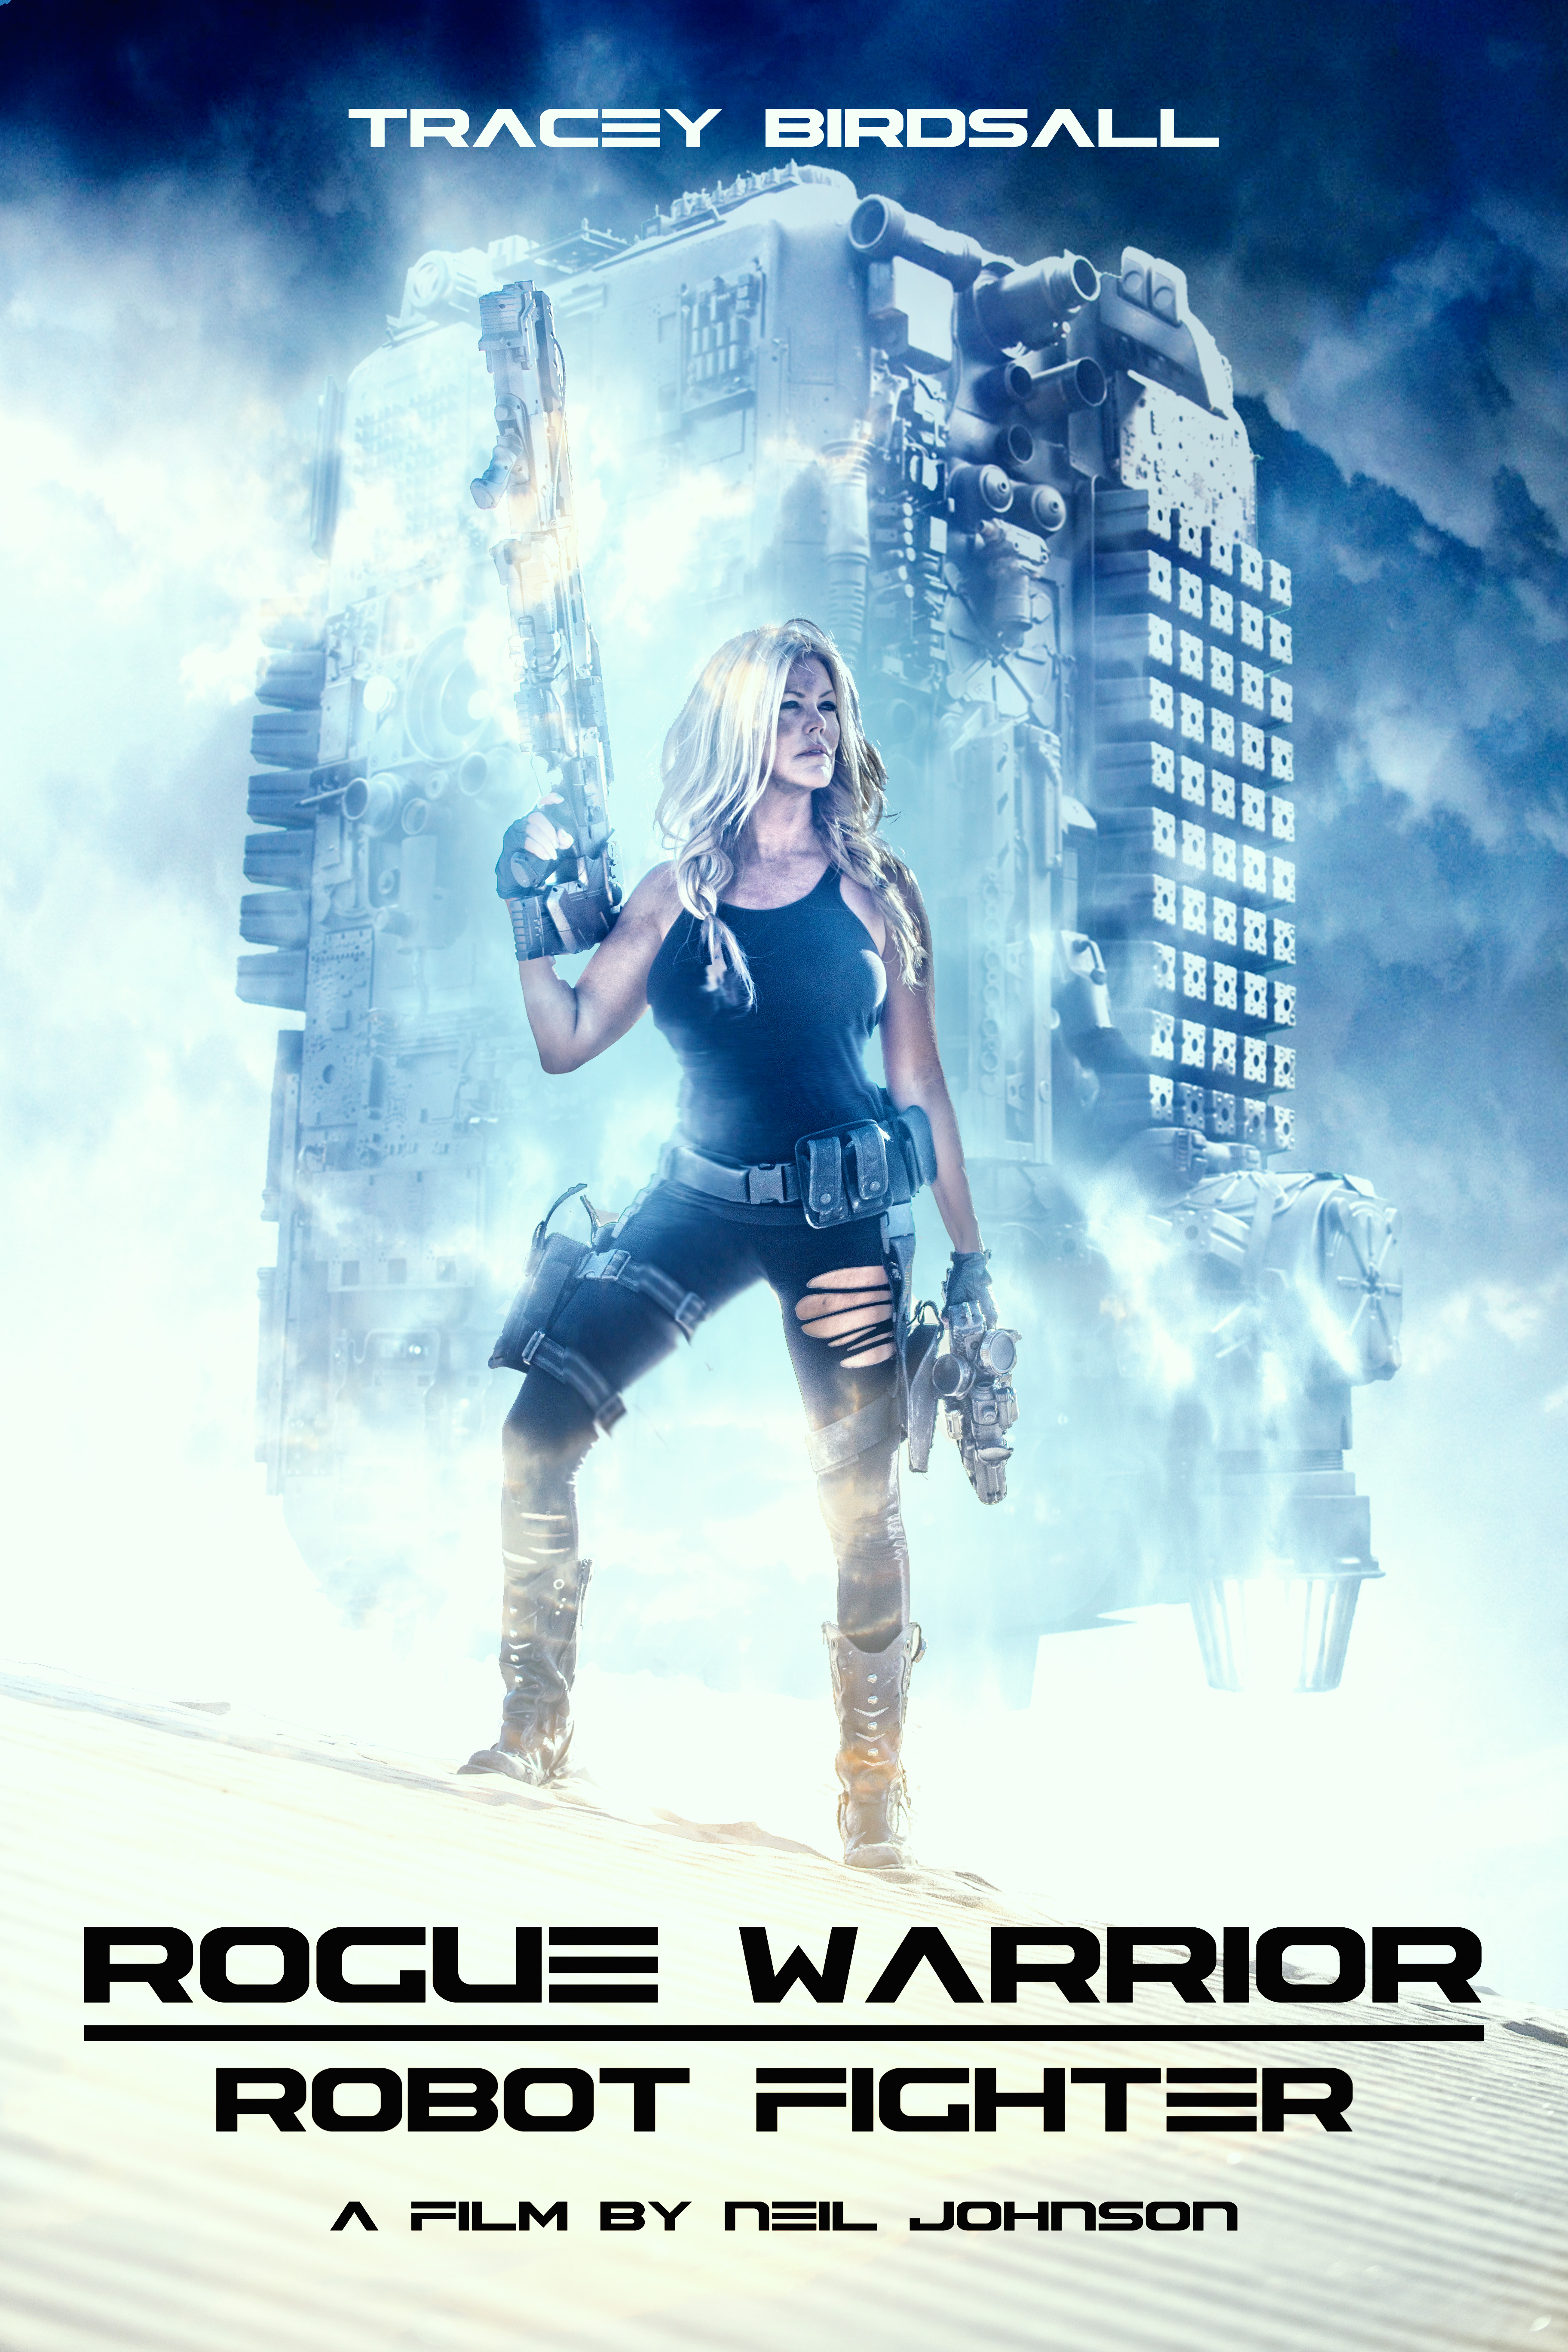 Teaser Poster for up-coming Rogue Warrior: Robot Fighter starring Tracey Birdsall